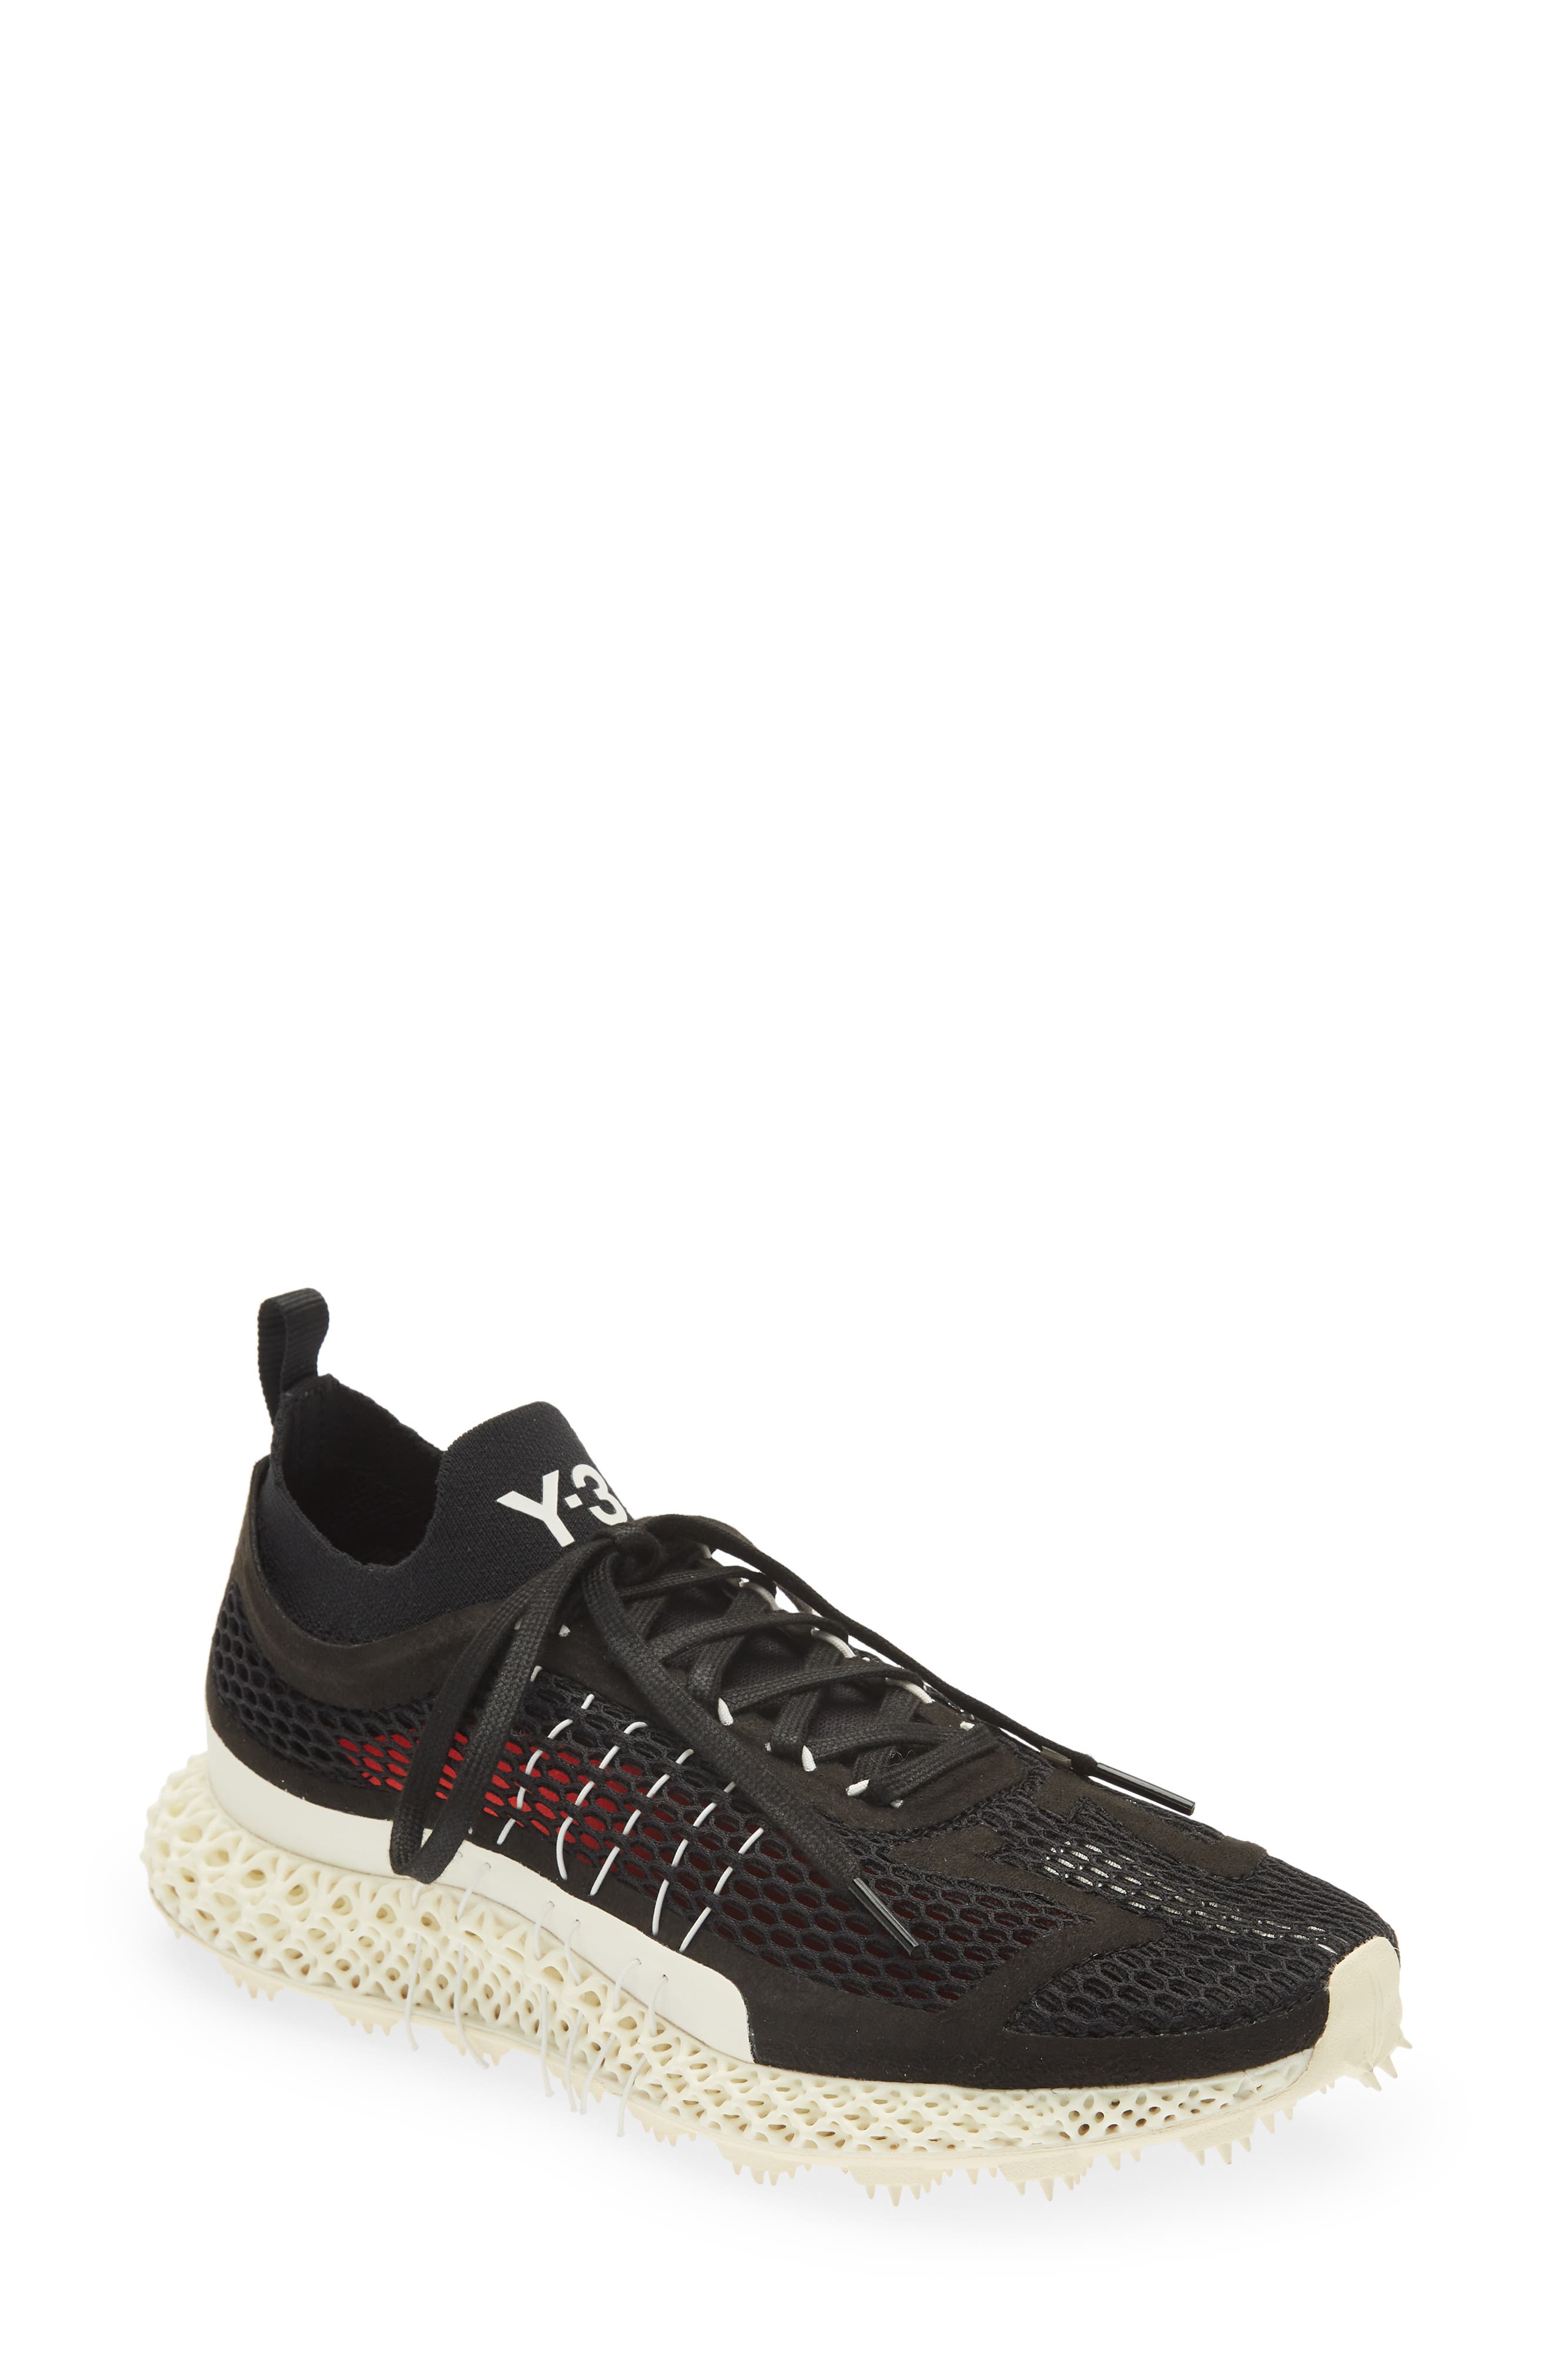 Y-3 adidas 4D Halo Running Shoe in Black/Corewhite/Red at Nordstrom